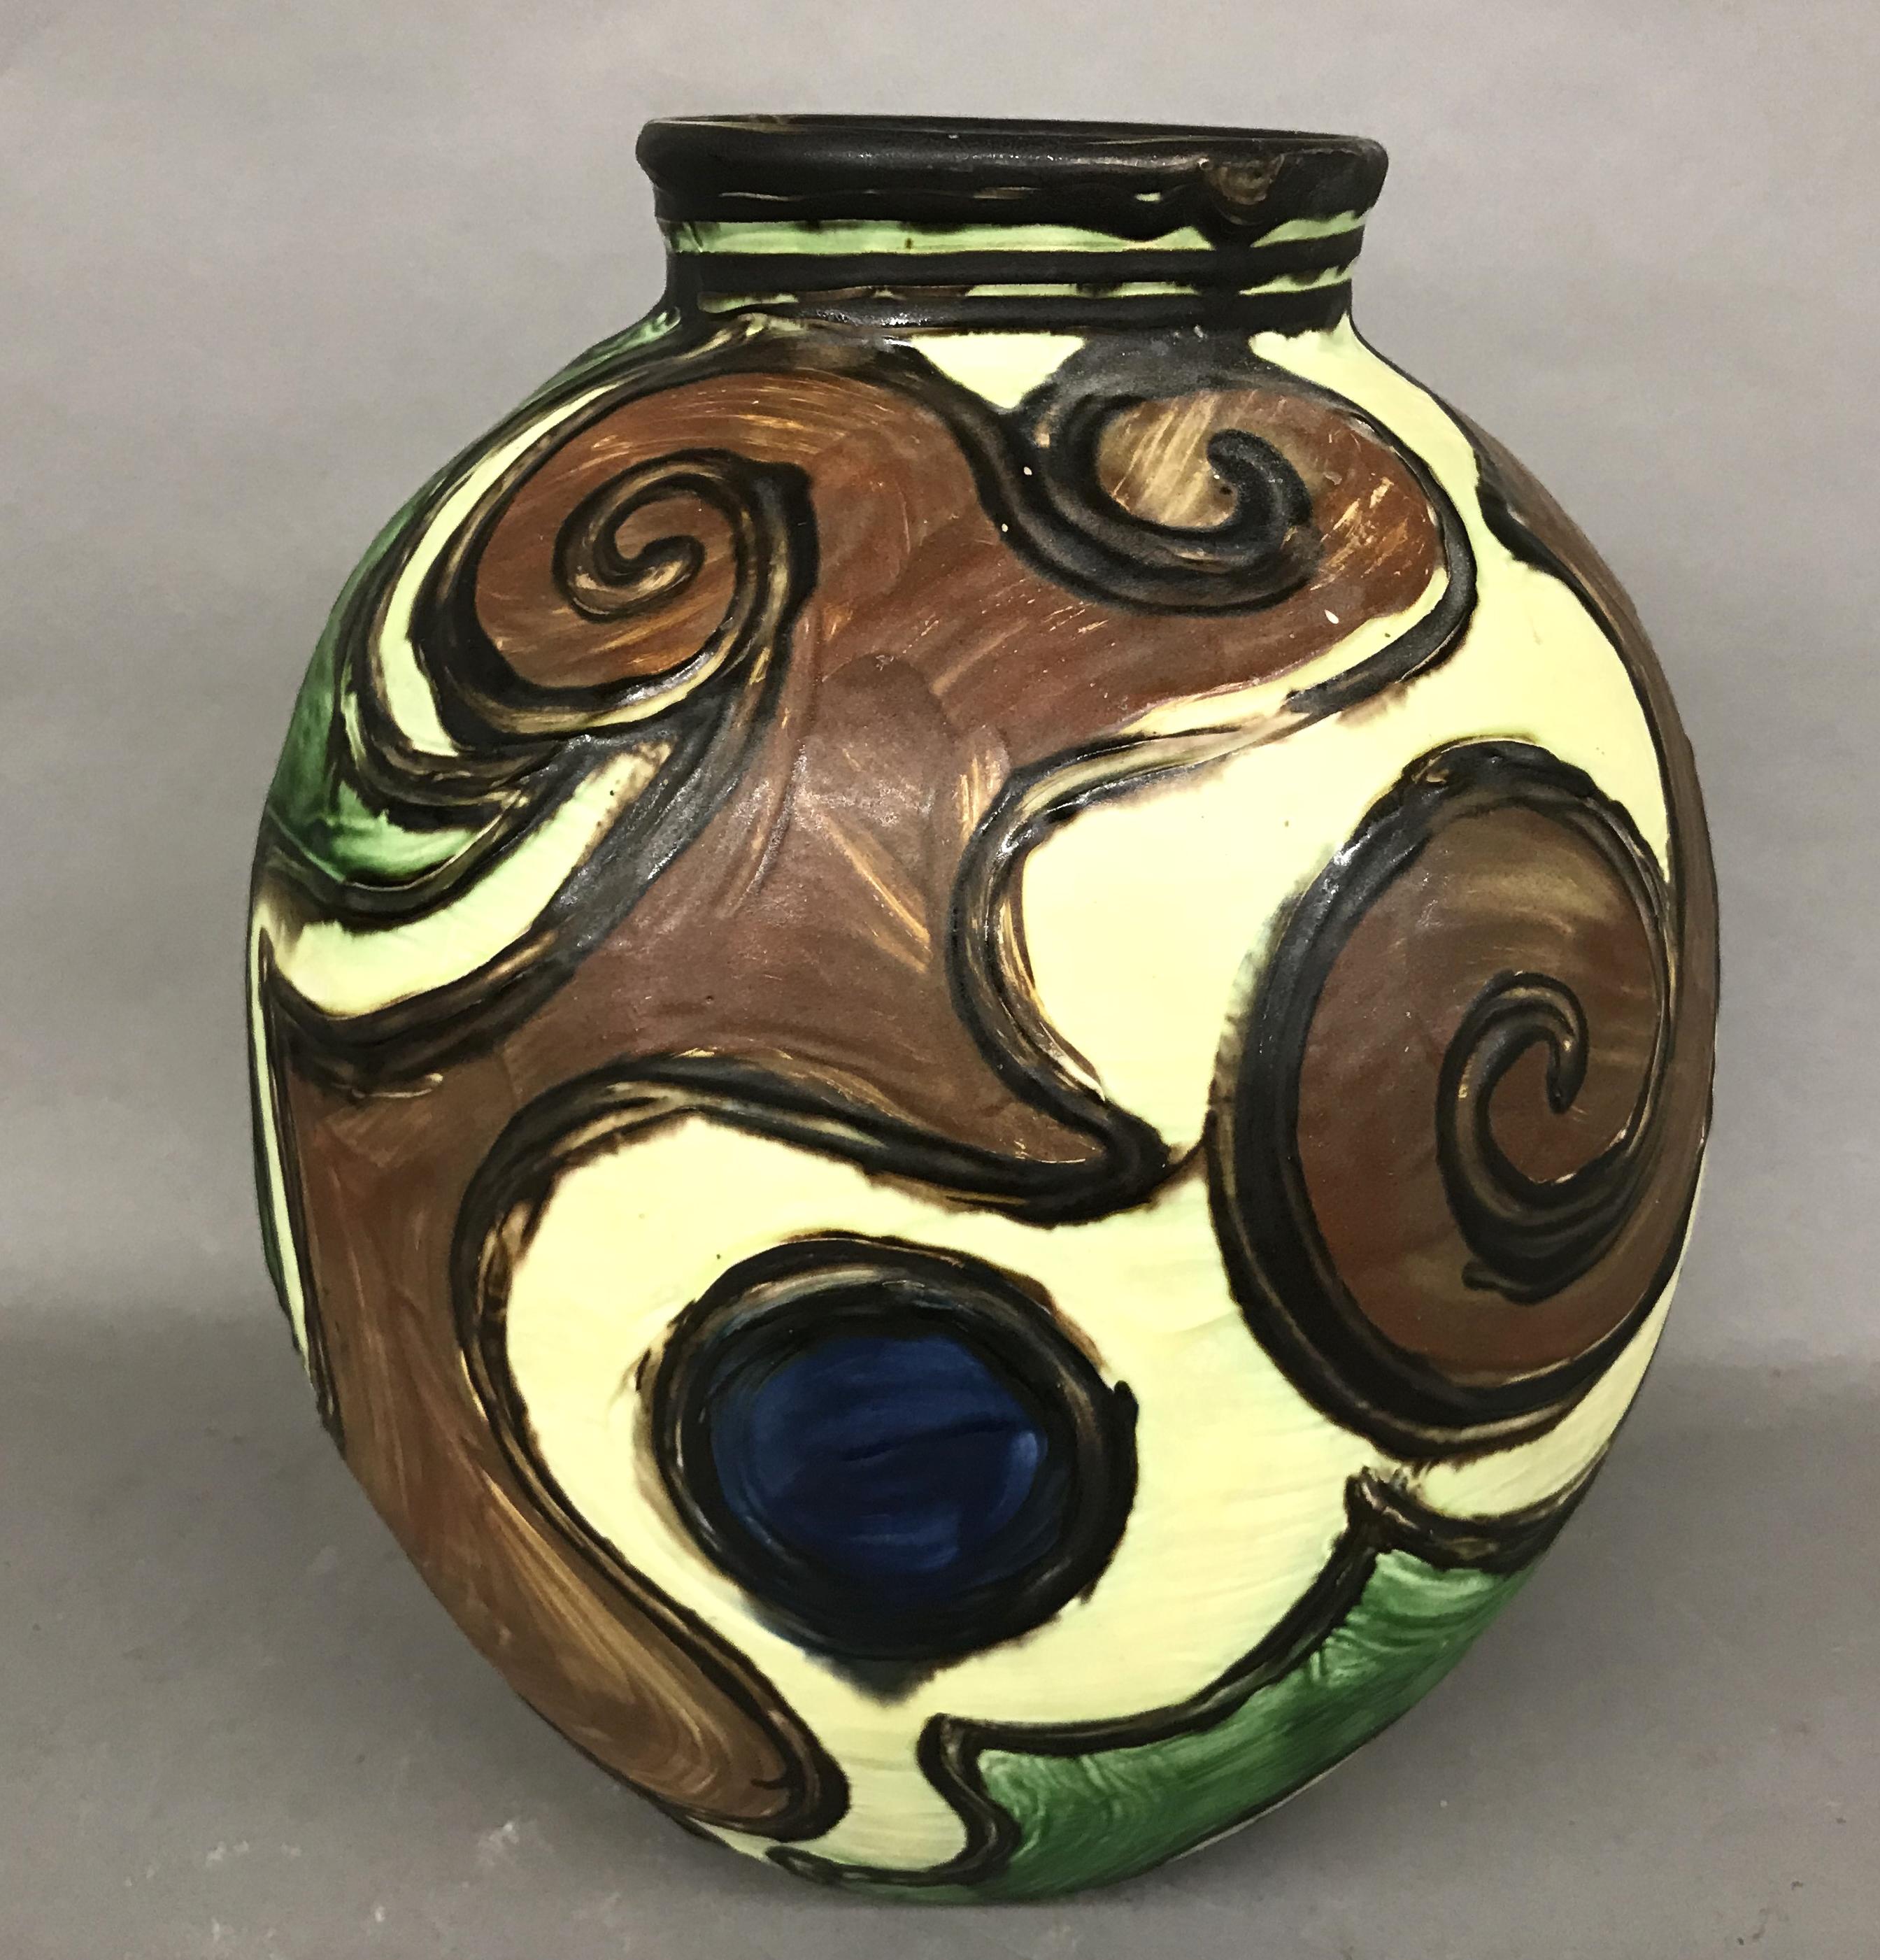 A fine polychrome earthenware vase by Danish artist Jens Thirslund (1892-1942) made for Herman. Kähler Keramik. Thirslund, a known Danish painter, married Stella Kähler, daughter of Herman August Kähler, and became the artistic leader of the Kähler